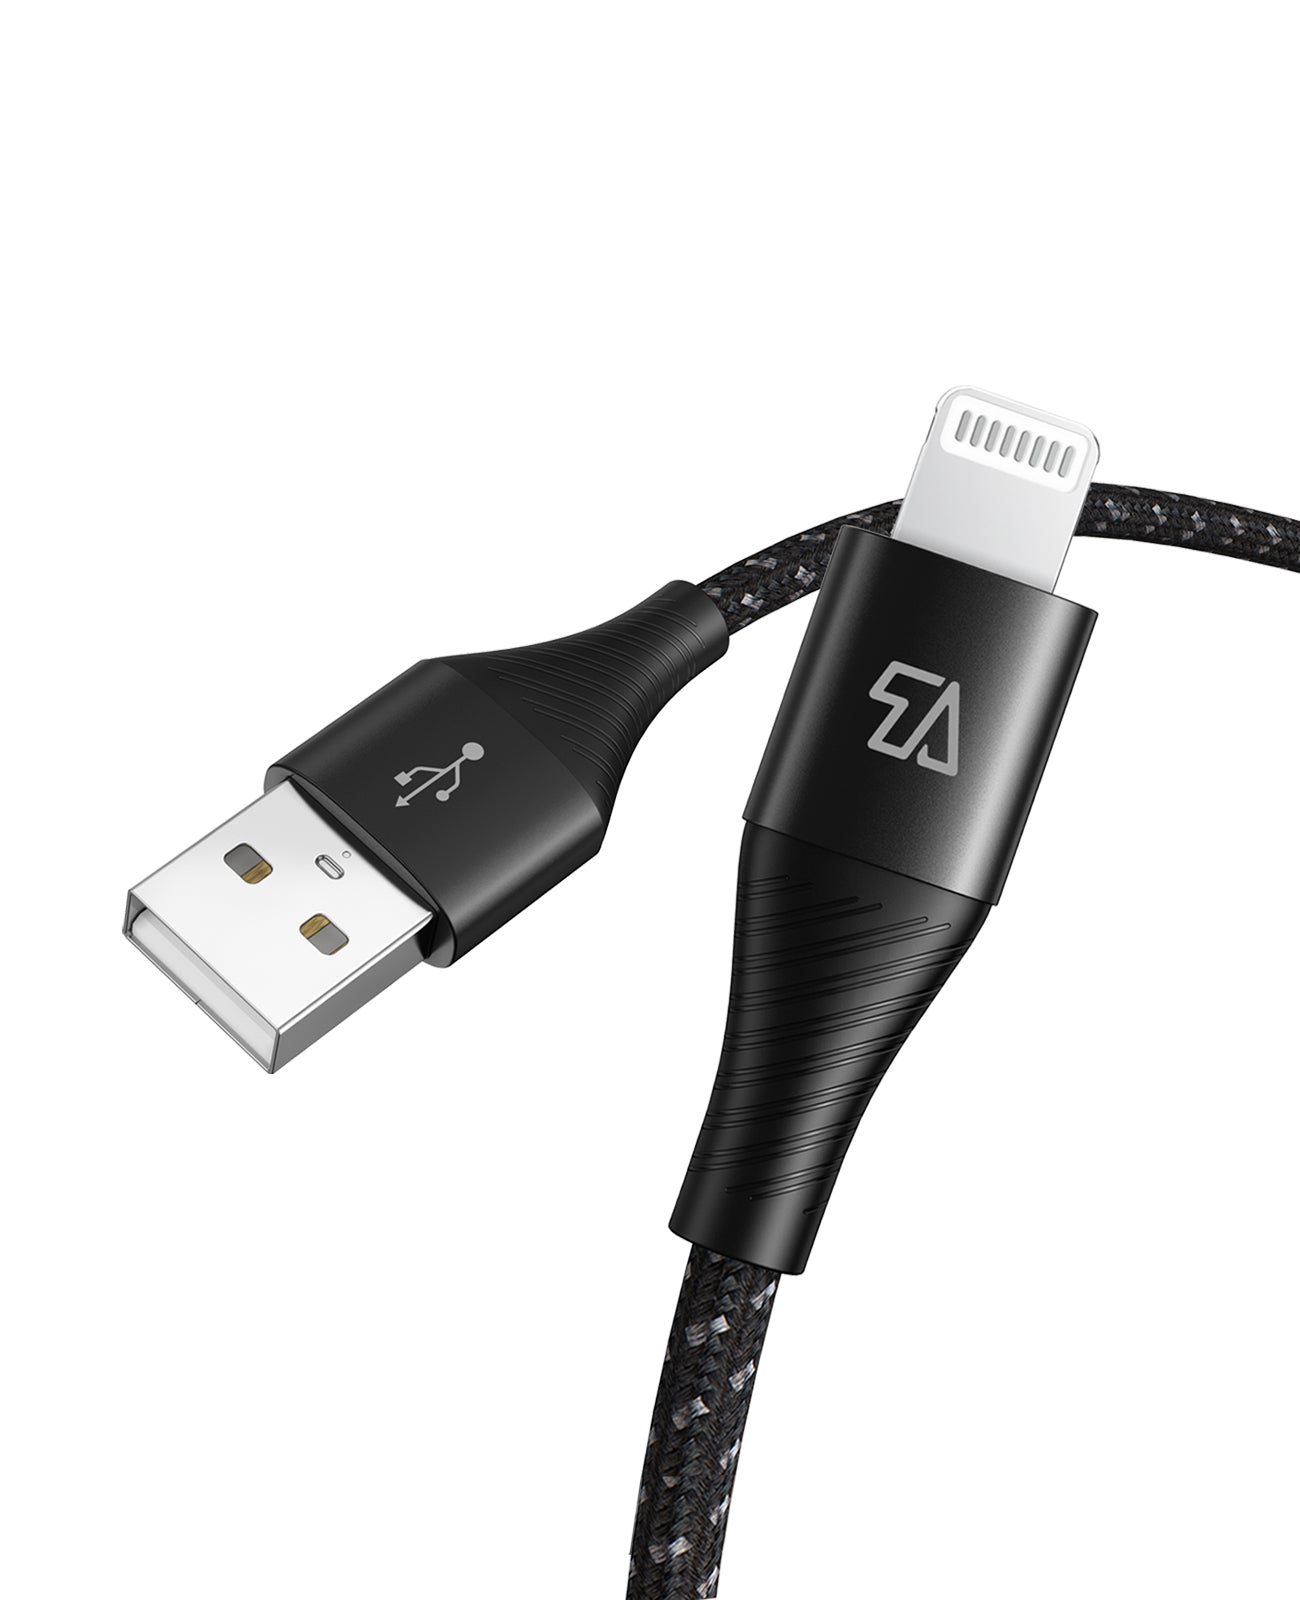 3ft (0.9m) USB 2.0 USB-C to USB-A Cable M/M - Black